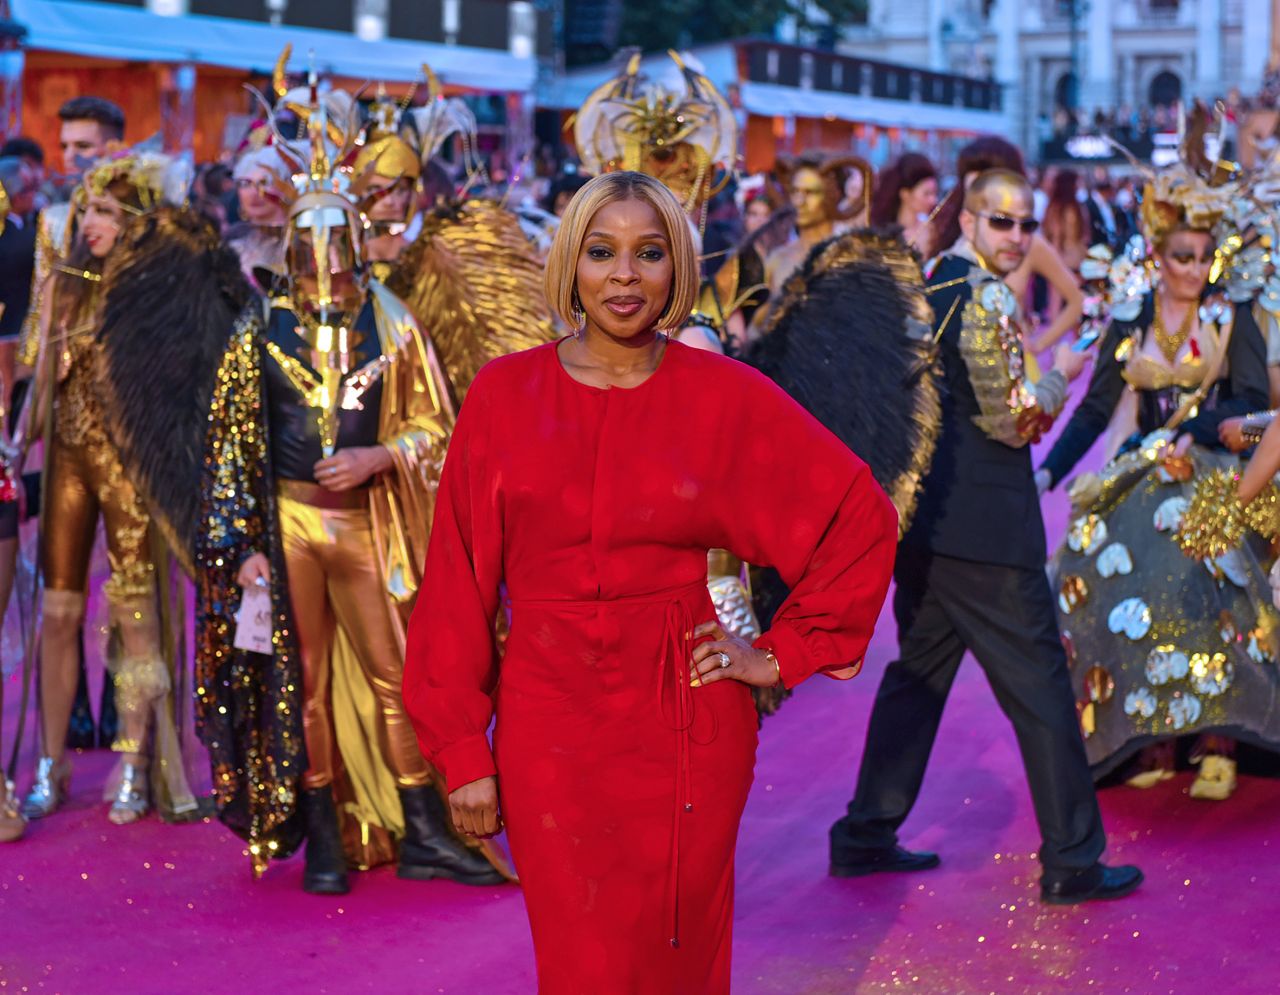 Mary J Blige Life Ball 2015 Weekend At City Hall In Vienna